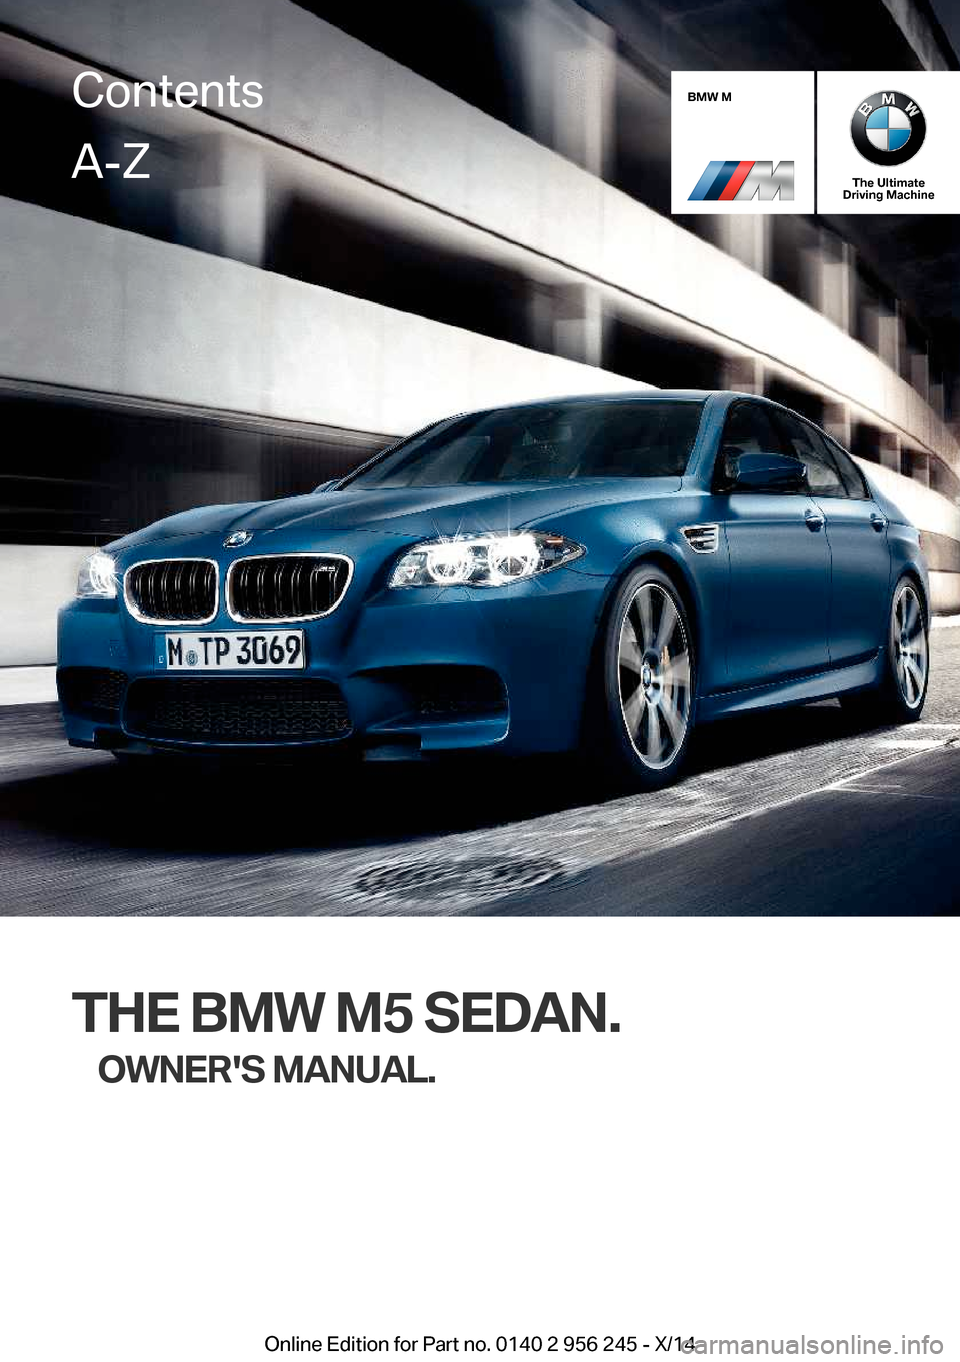 BMW M5 2014 F10M Owners Manual BMW M
The Ultimate
Driving Machine
THE BMW M5 SEDAN.
OWNERS MANUAL.
ContentsA-Z
Online Edition for Part no. 0140 2 956 245 - X/14   